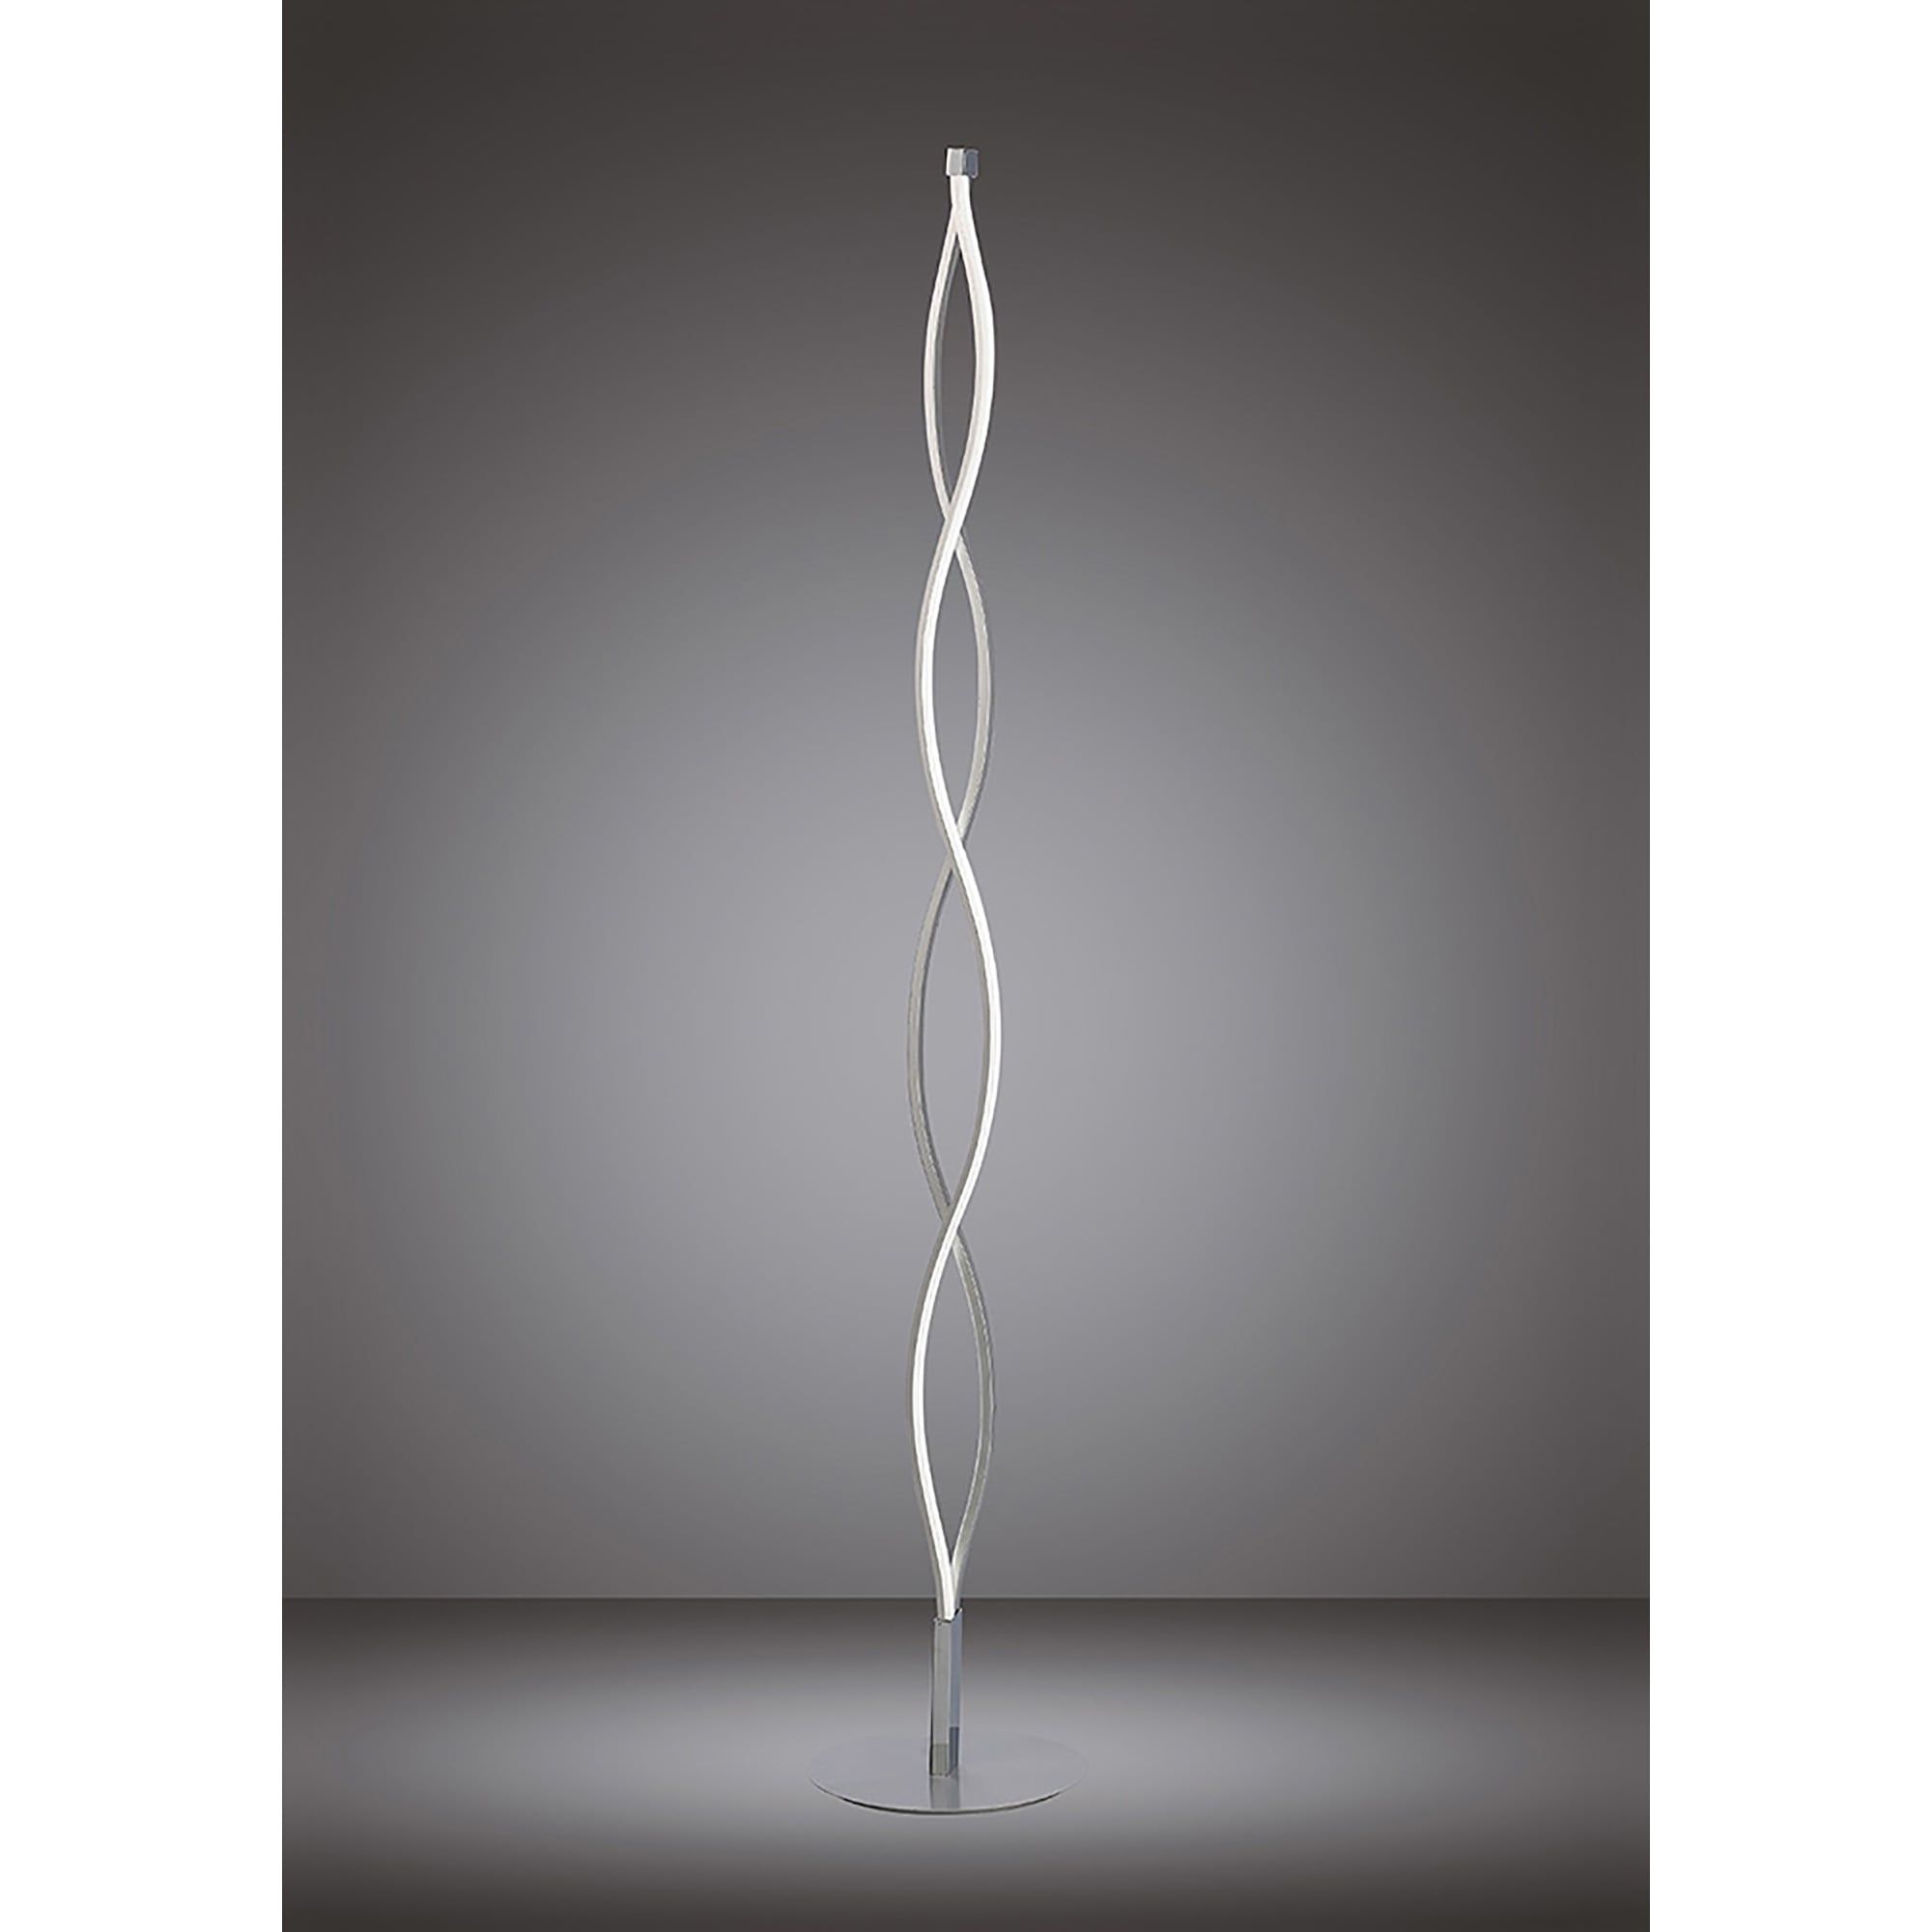 Newest Silver Metal Floor Lamps In Mantra M4861 Sahara Single Led Floor Lamp In Silver And Chrome Finish (View 10 of 15)